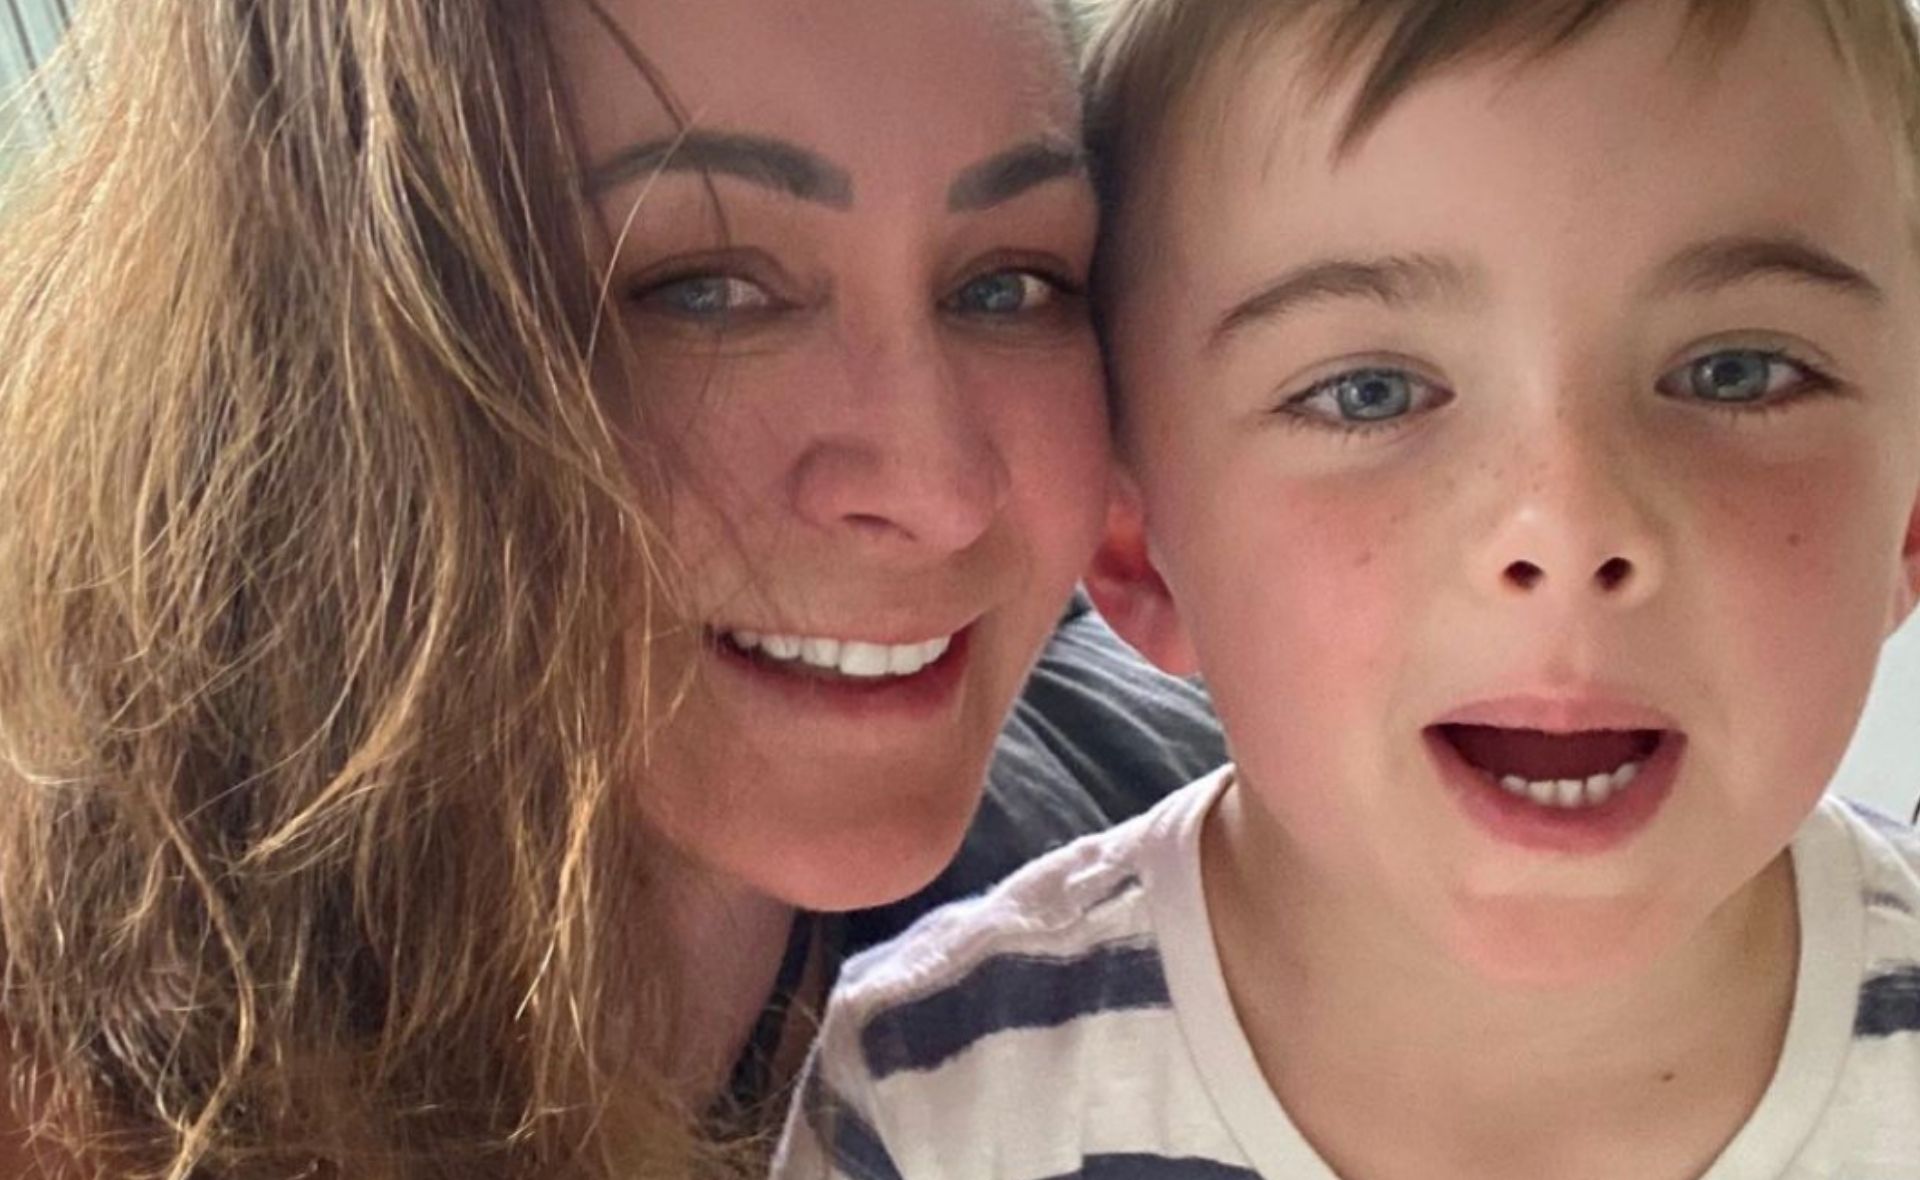 Michelle Bridges admits she was wrong for giving out “naive” advice when she welcomed her son